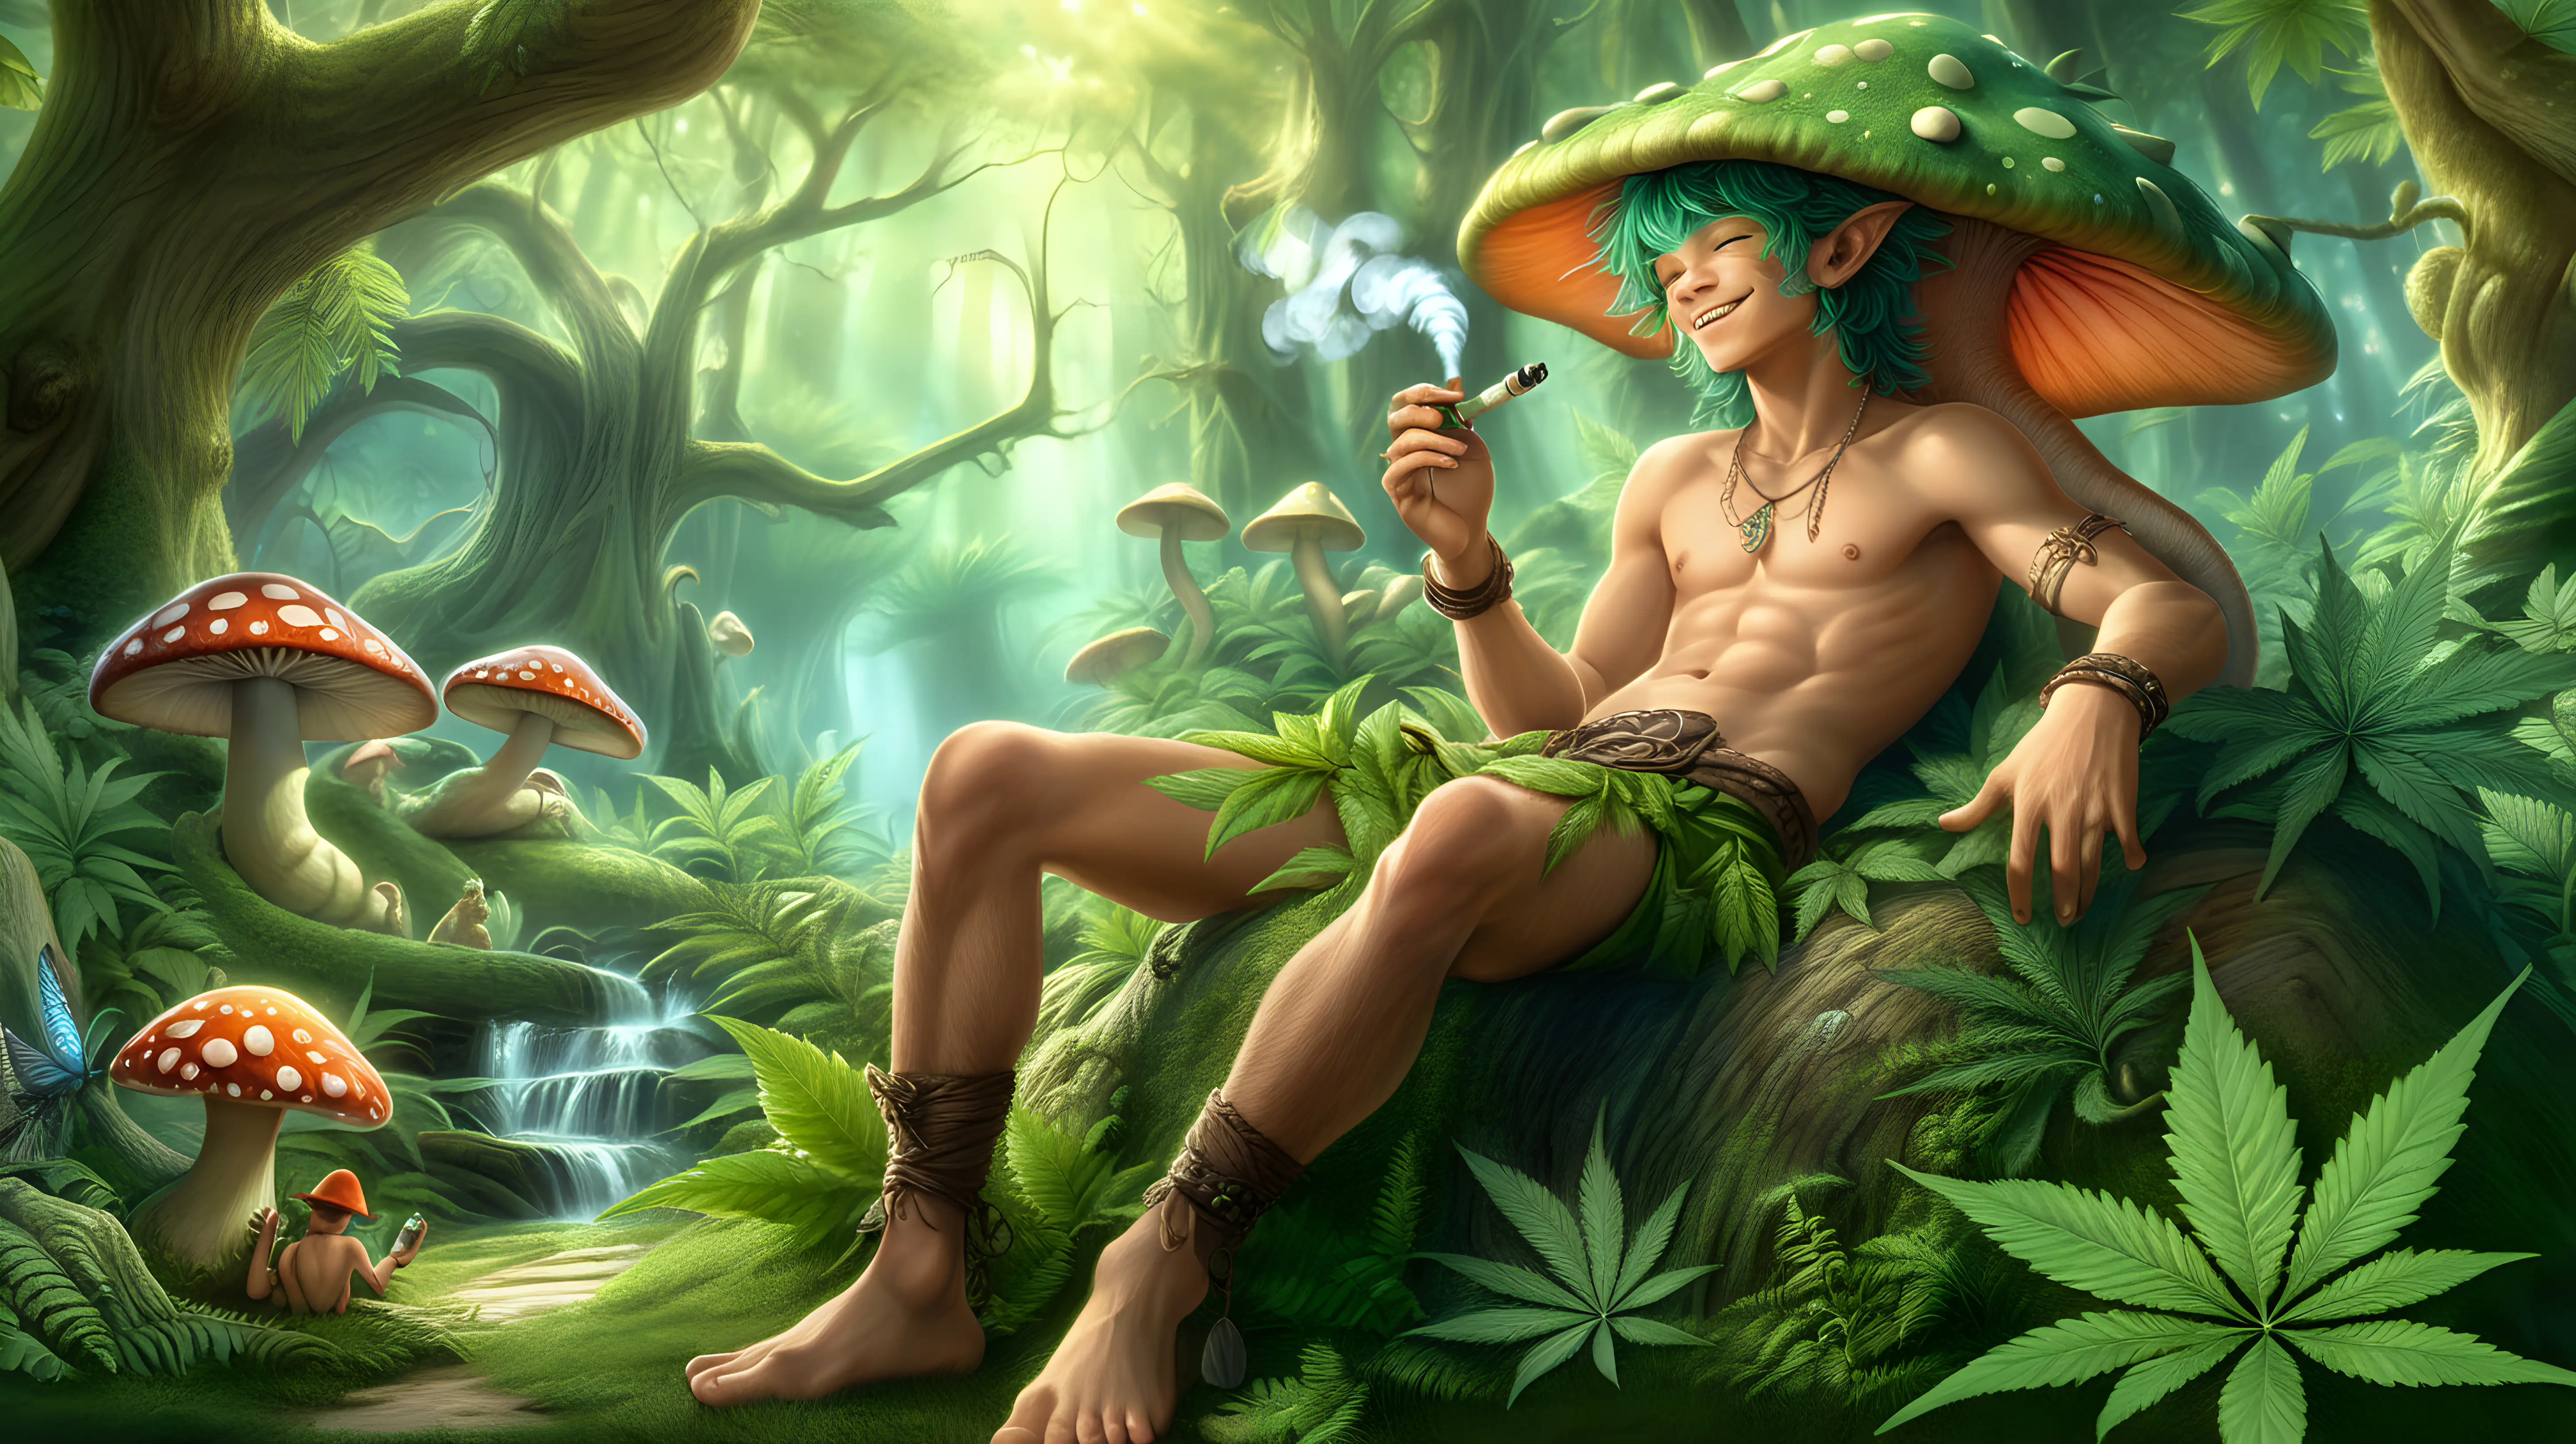 award winning cgi, 8k, fantasy art, a sexy 18 year old anthropomorphic dragon boy with fae features, draped in a foliage loincloth, reclines on a mushroom cap smoking a pipe of cannabis, having a smoke break, he is in an enchanted forest where wild cannabis grows everywhere, big trippy phallic mushrooms dot the landscape, there are pixies and other fantasy creatures in the background, and the whole picture has a happy fantasy feeling in an idyllic magical setting, a sleepy content smile is on his face